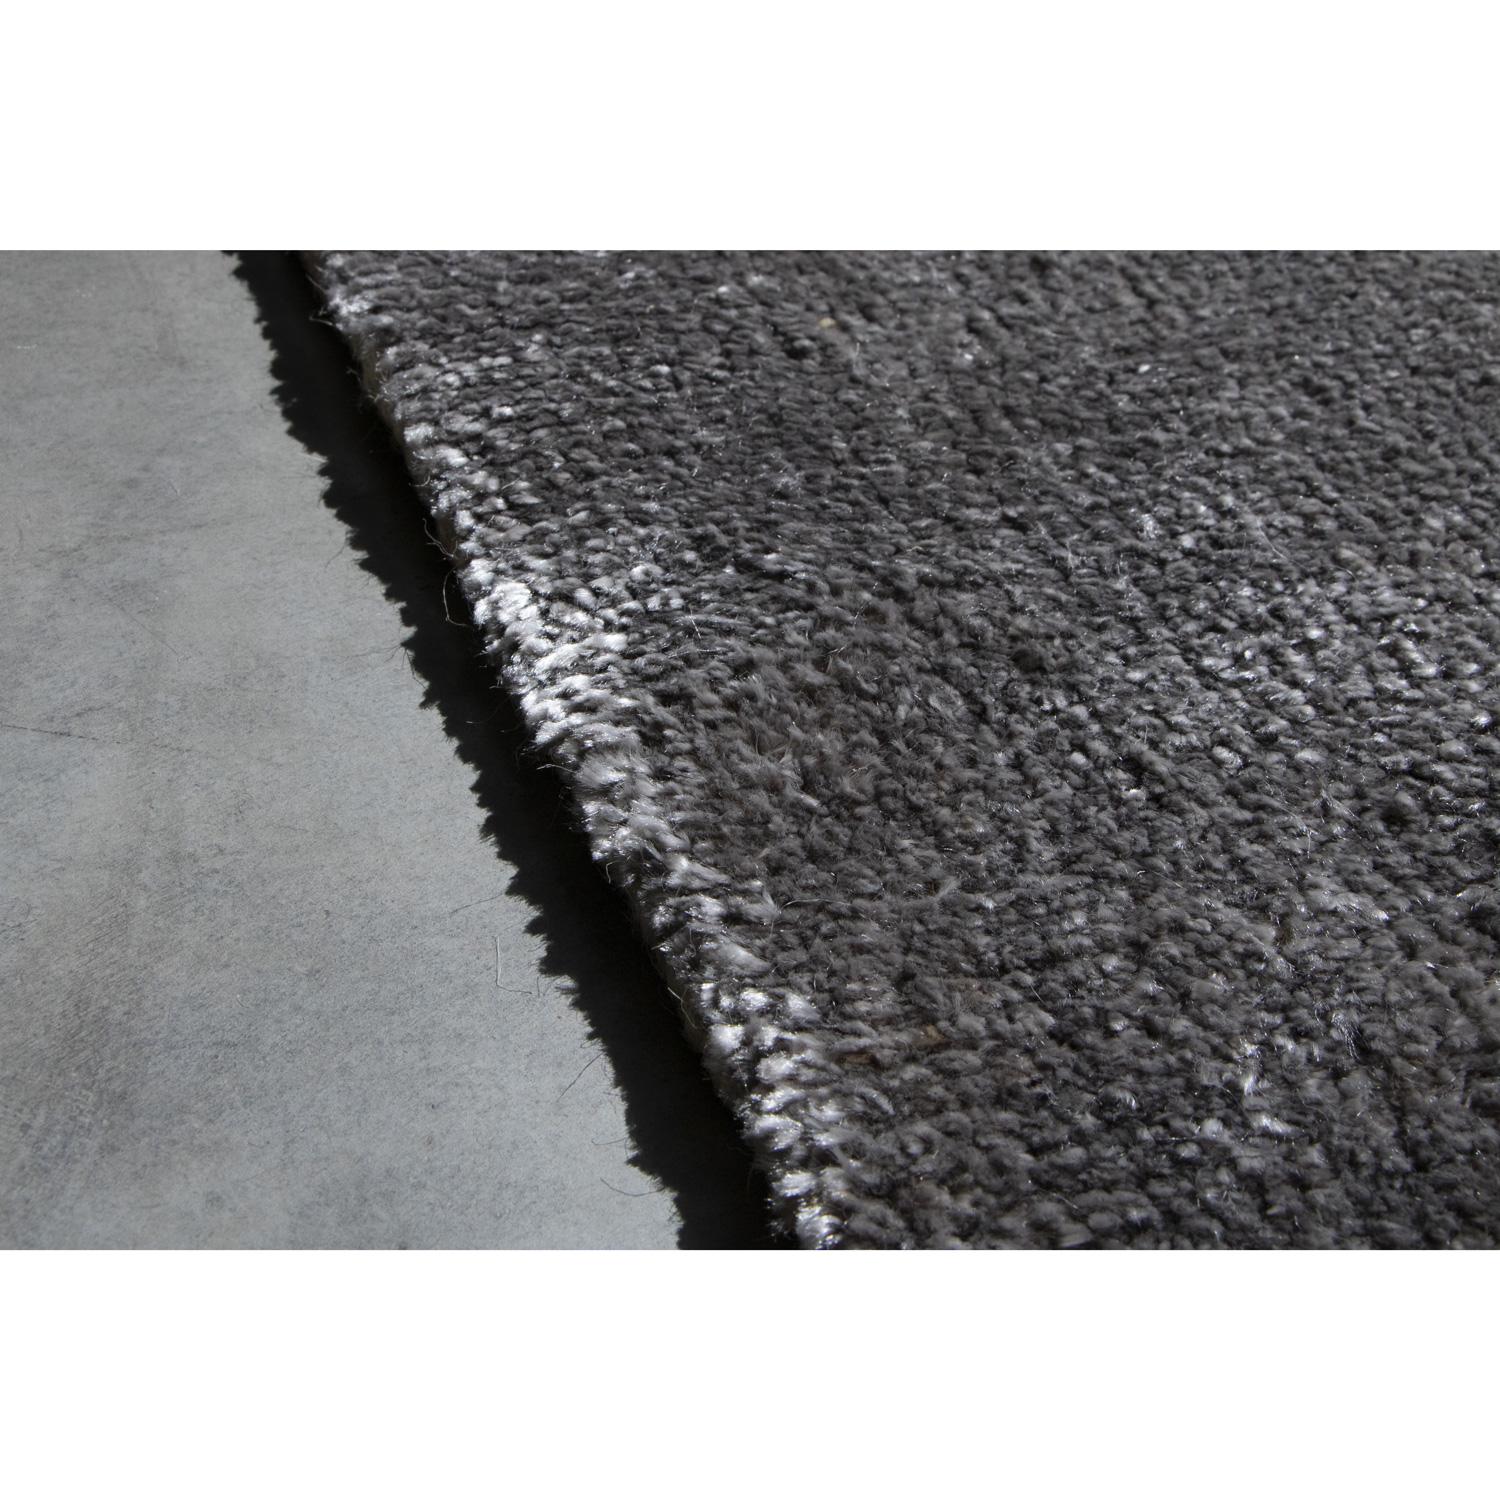 Modern 21st Cent Luxury Shiny Velvety Silvery Rug by Deanna Comellini In Stock 60x120cm For Sale